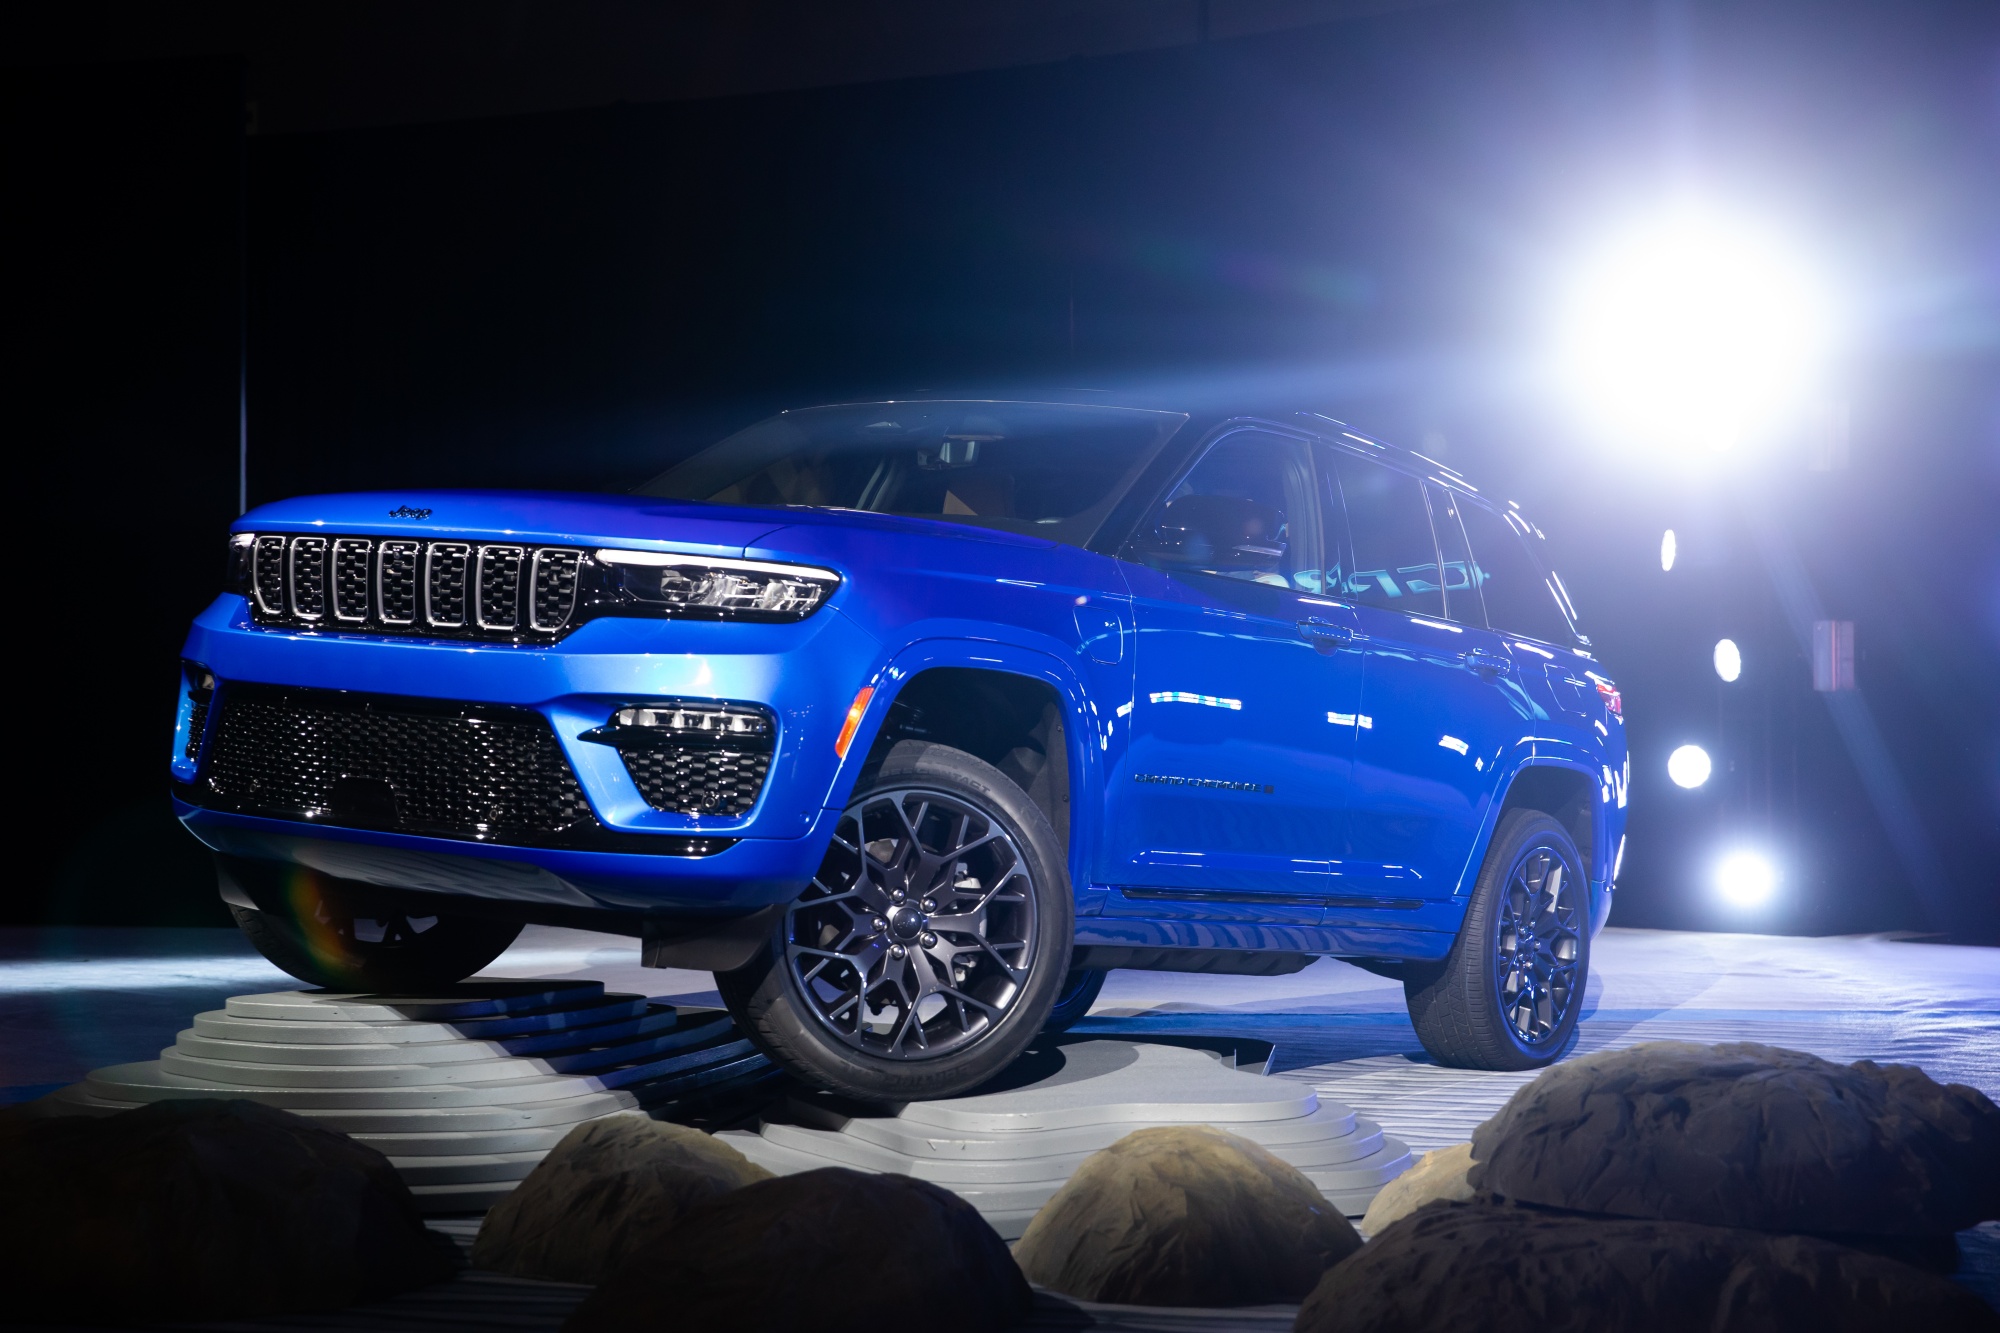 A Jeep Grand Cherokee 4xE electric vehicle at the 2022 New York International Auto Show on&nbsp;April 13.